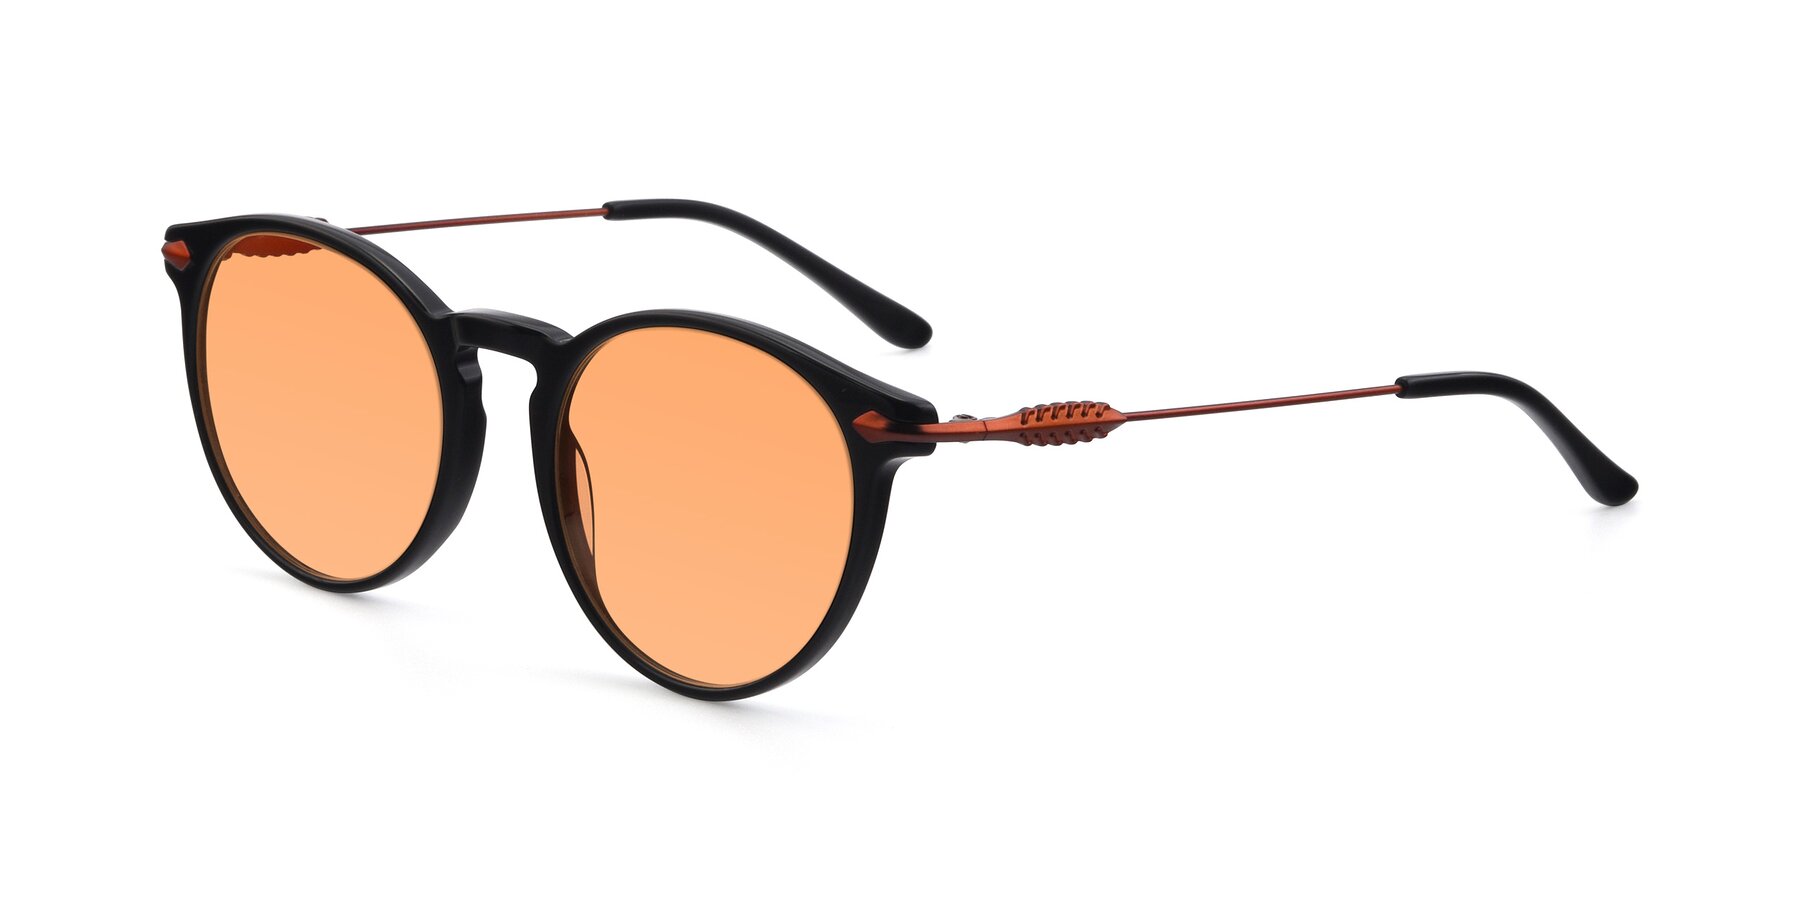 Angle of 17660 in Black with Medium Orange Tinted Lenses